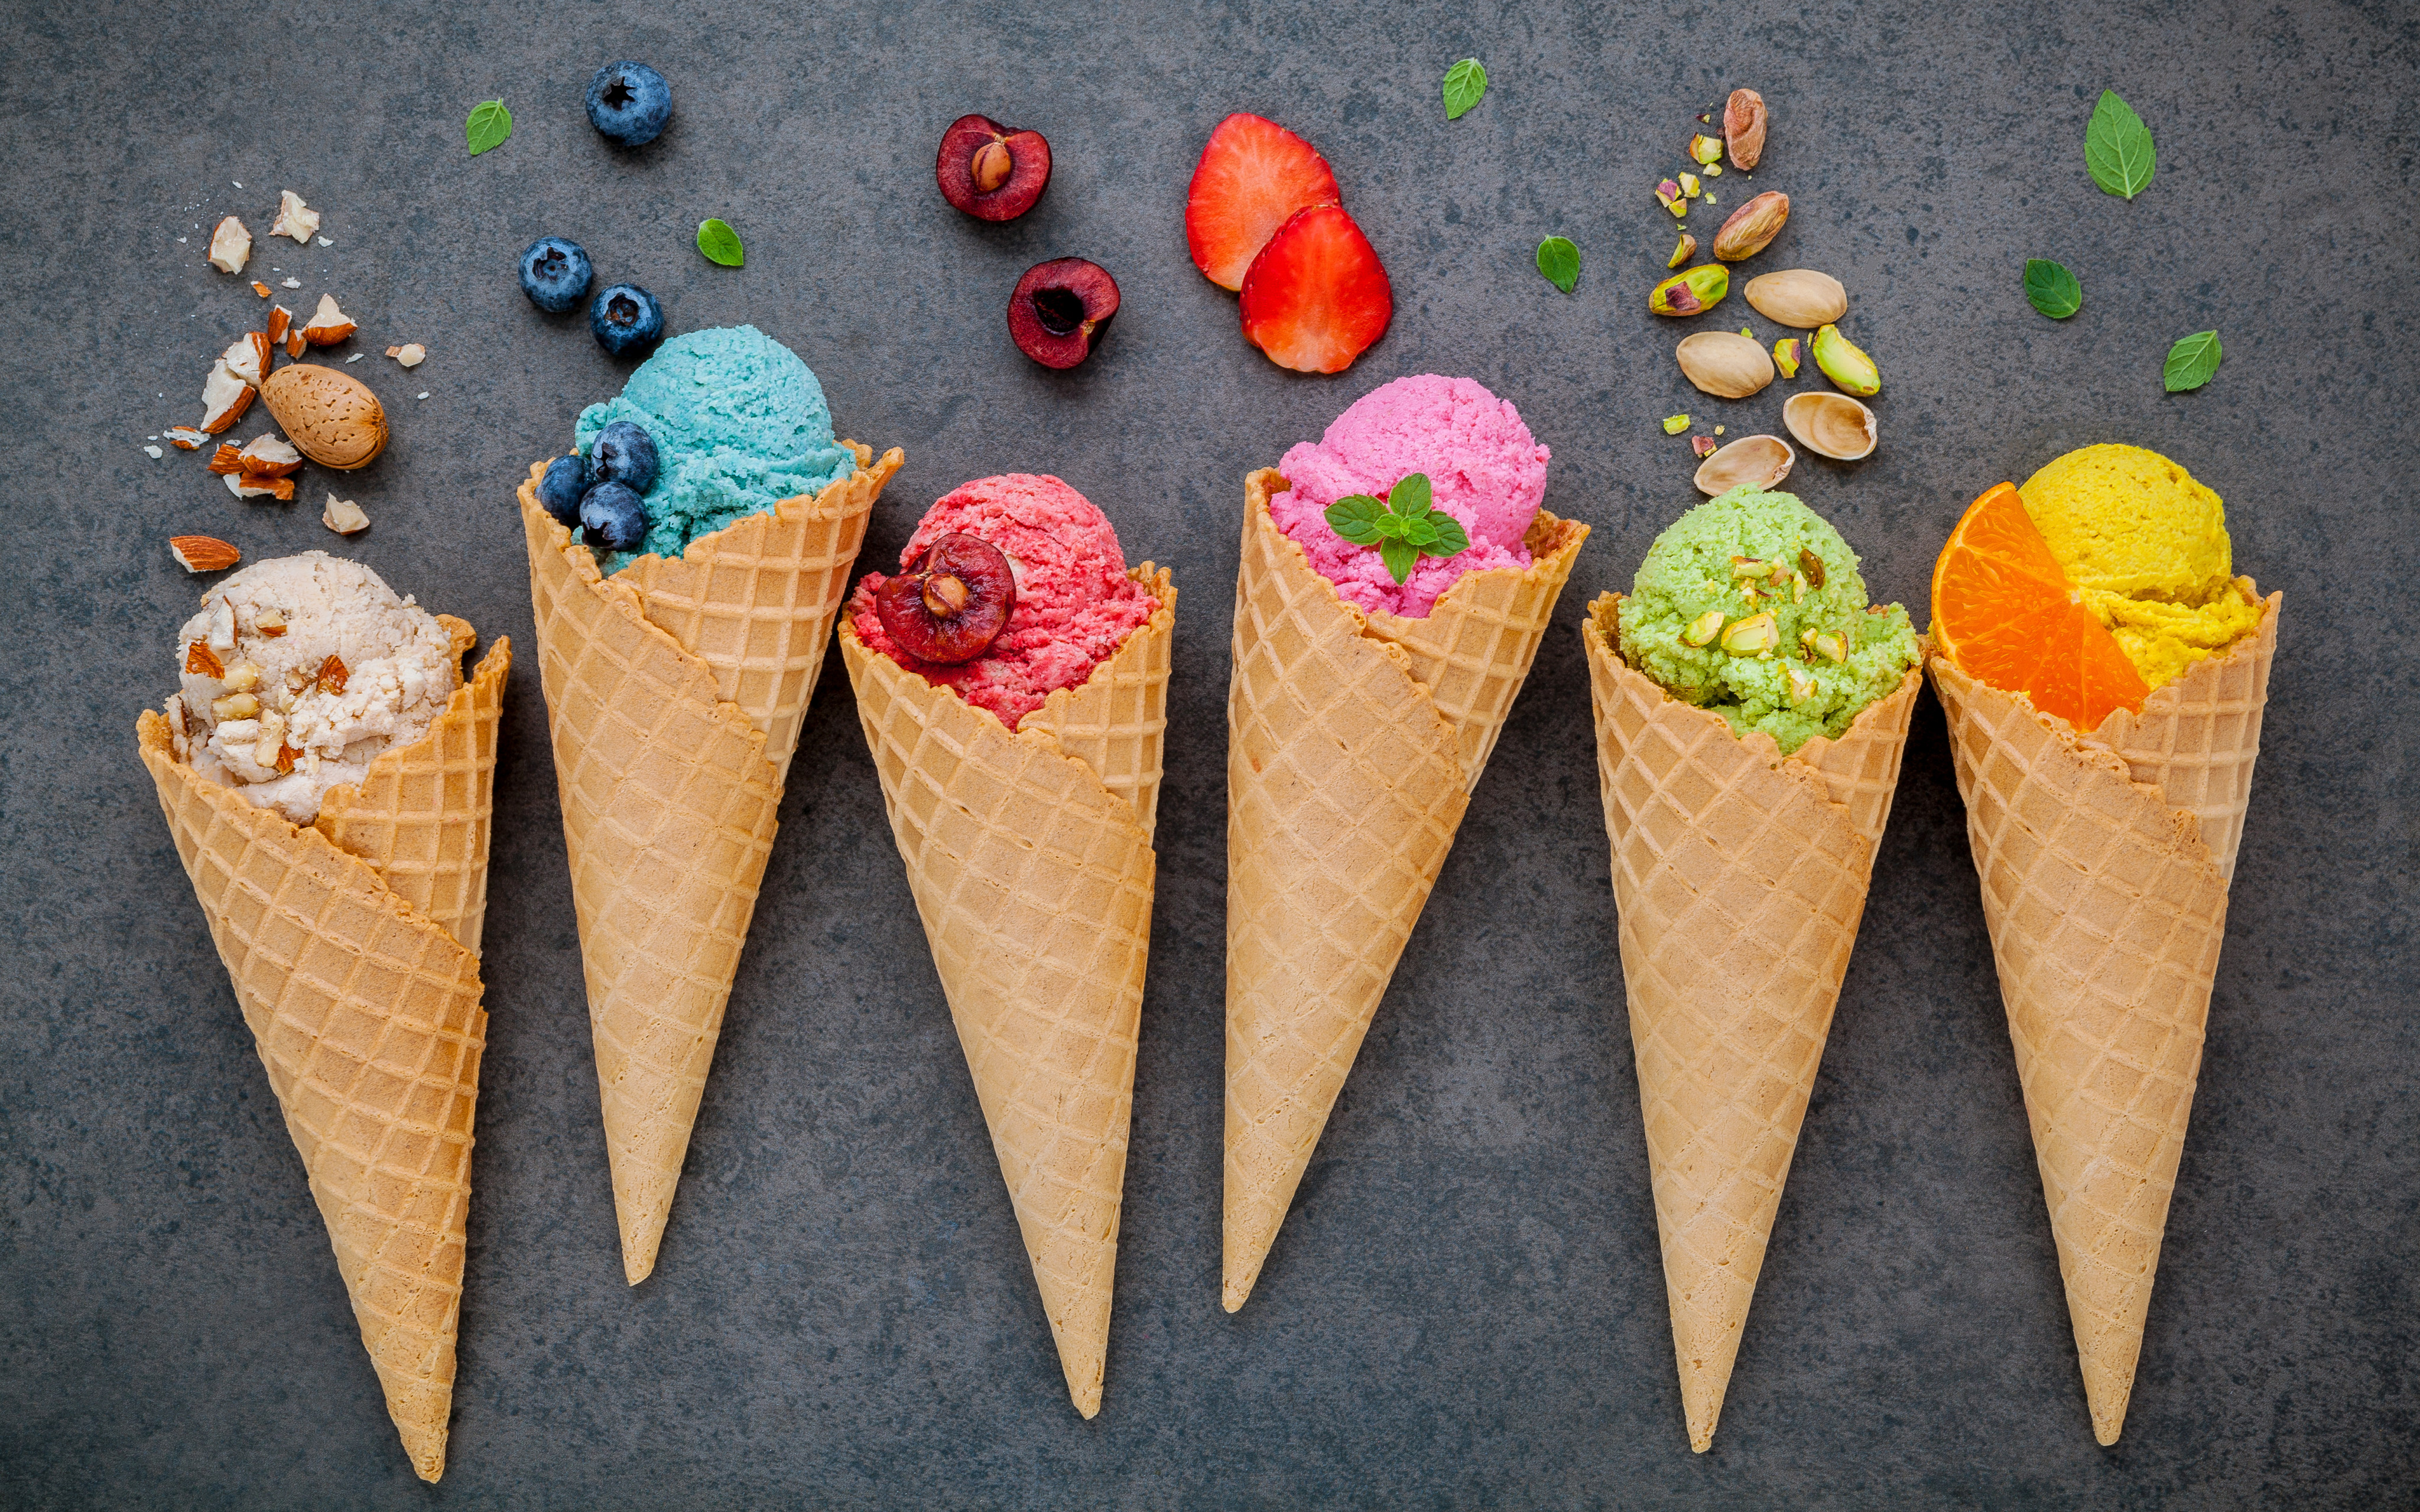 This week’s podcast talks about a new ice cream made from coconut oil that still tastes like the real thing. Photo: Shutterstock